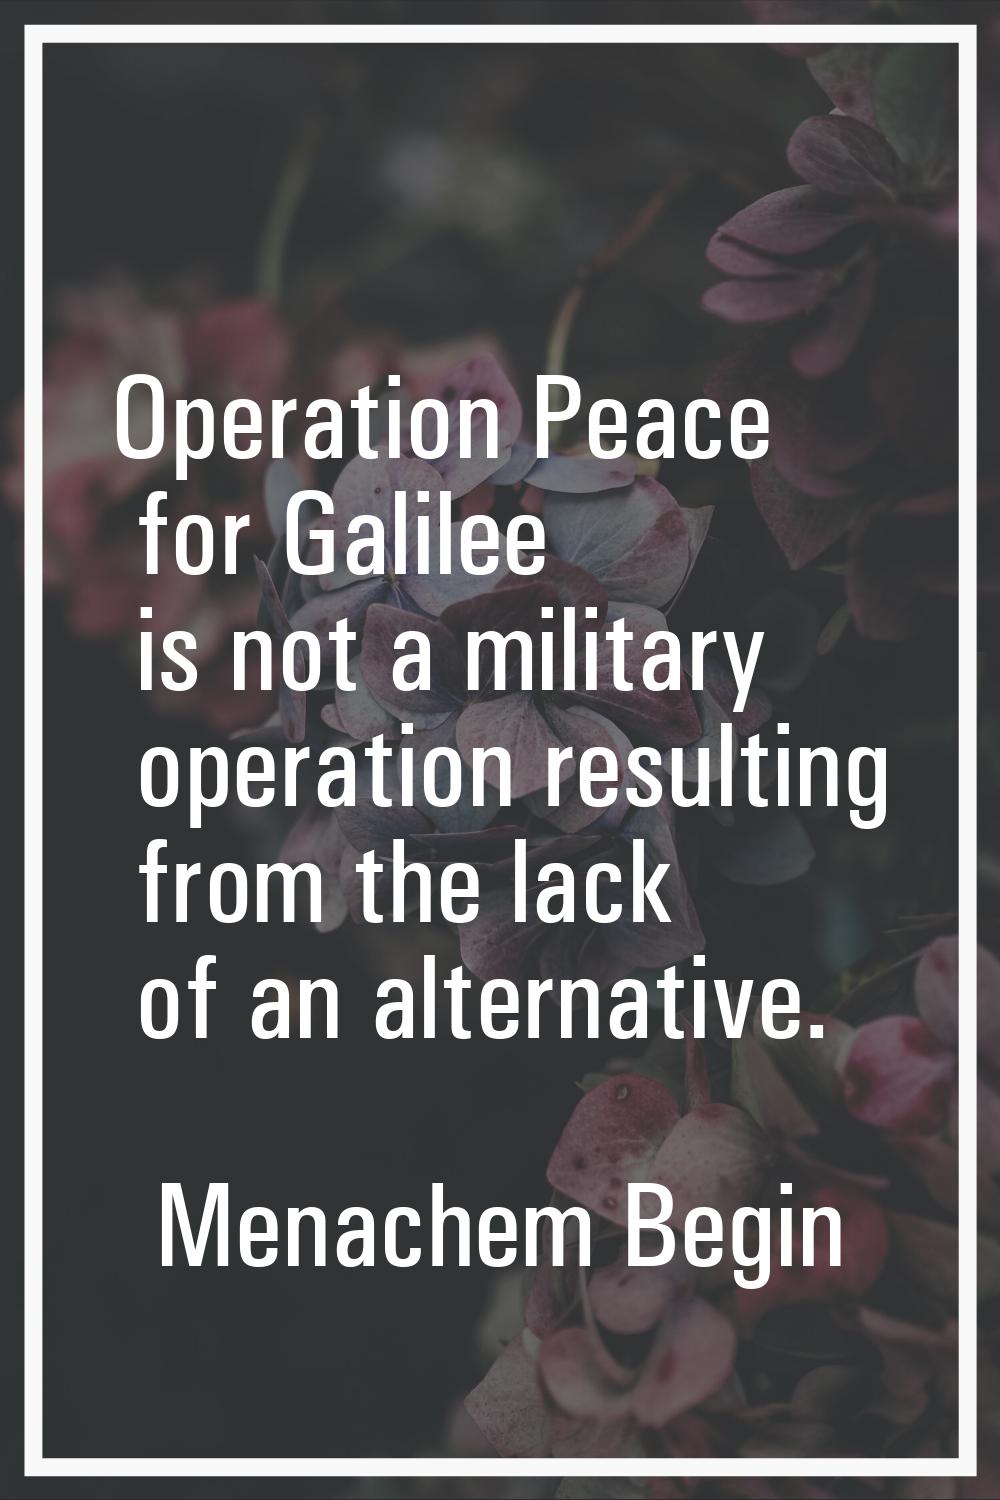 Operation Peace for Galilee is not a military operation resulting from the lack of an alternative.